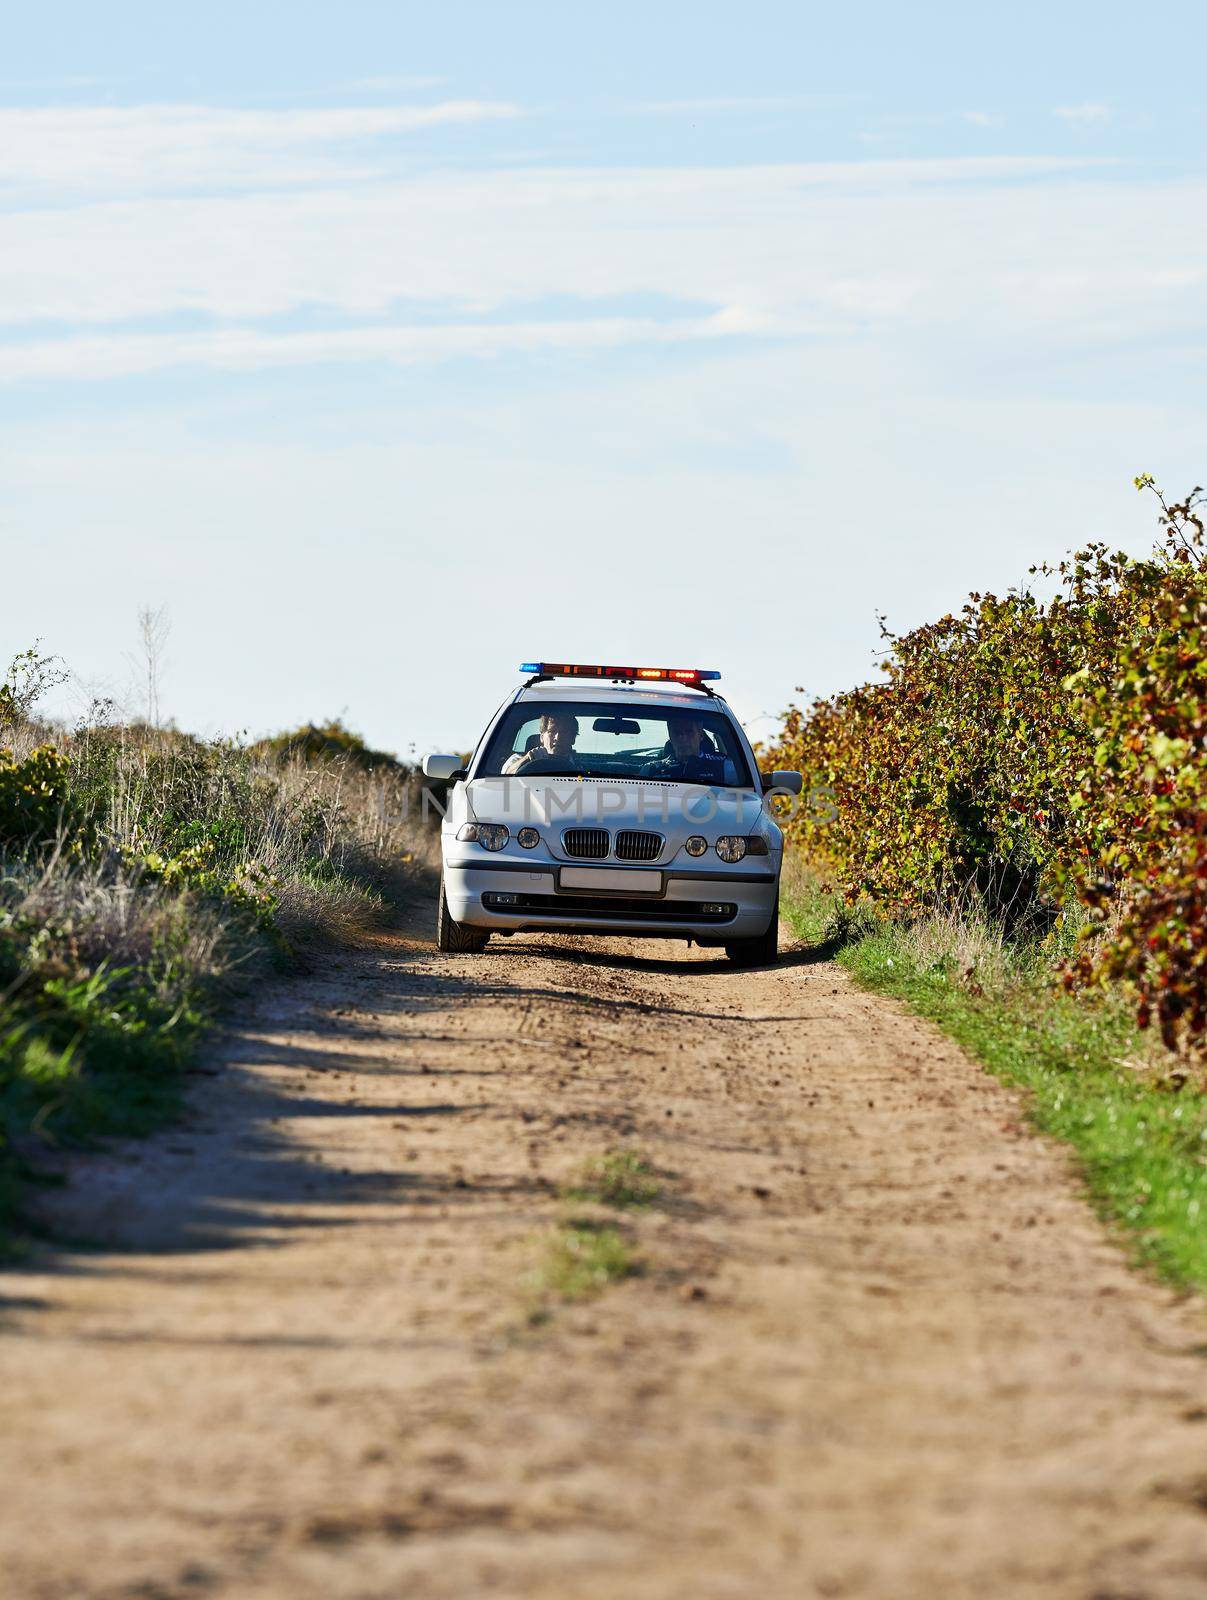 Police patrol. Shot of a police car driving down a dirt road. by YuriArcurs